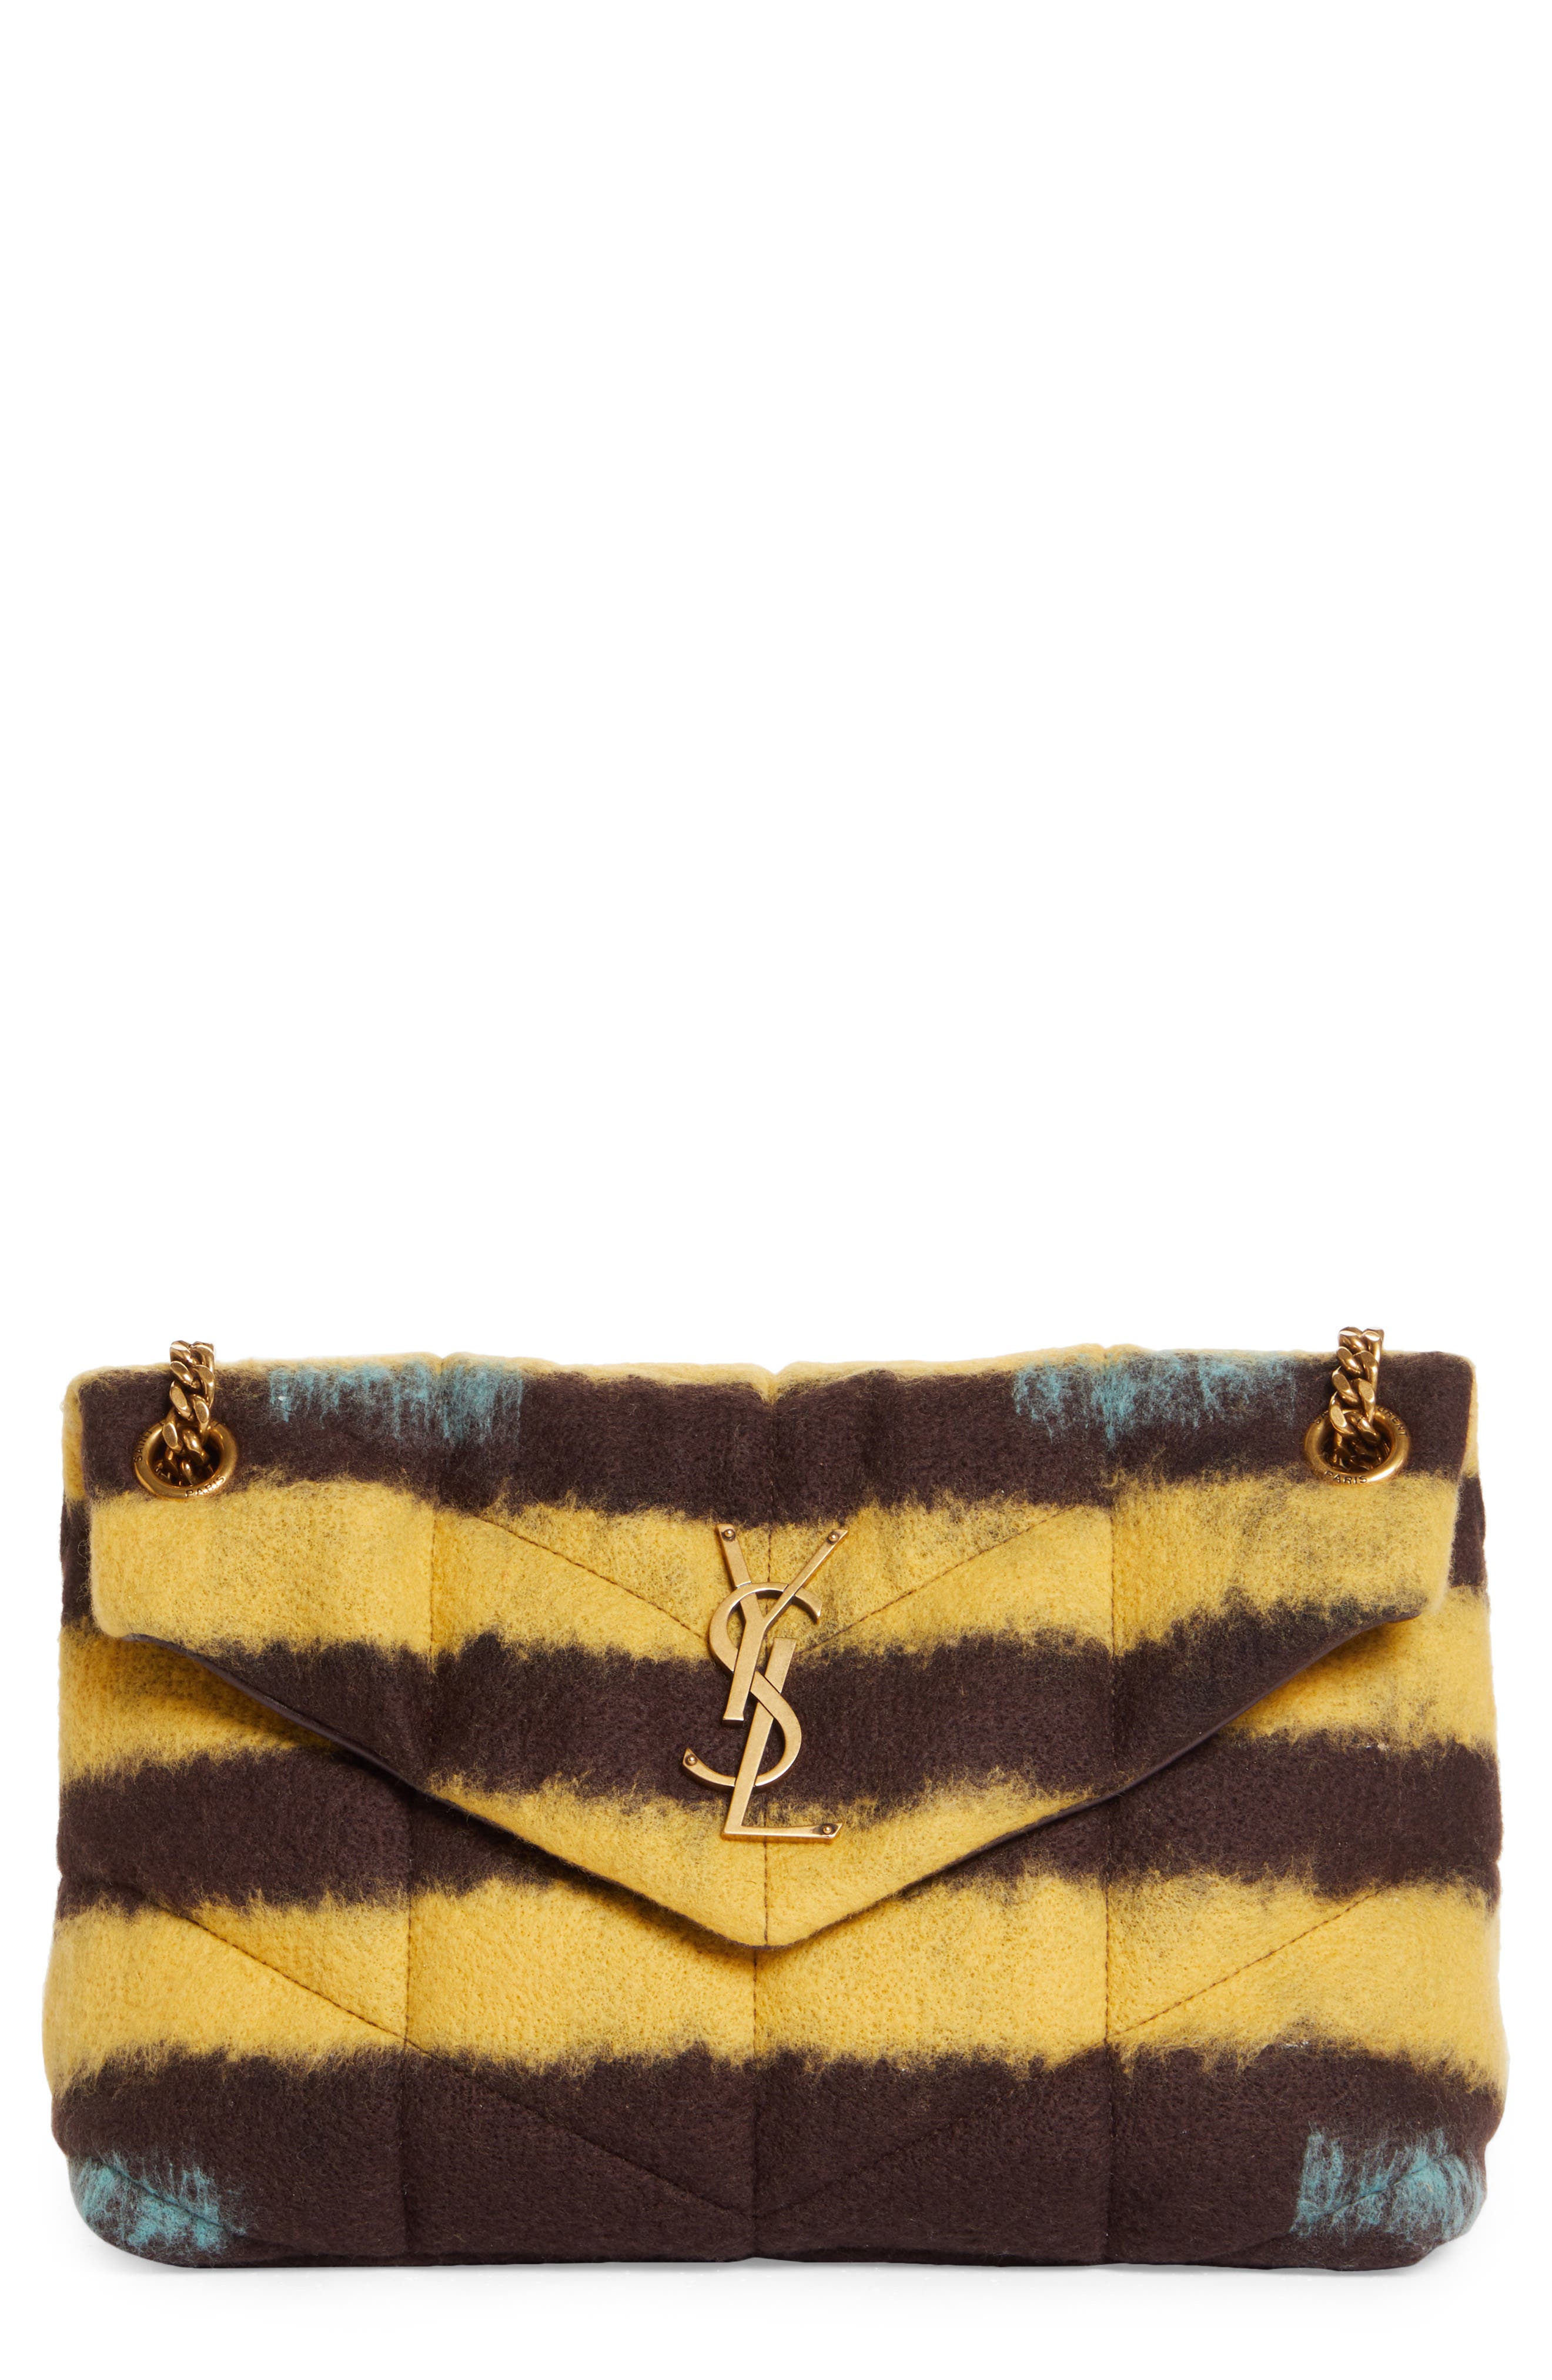 Saint Laurent Loulou Small Leather Shoulder Bag in Yellow